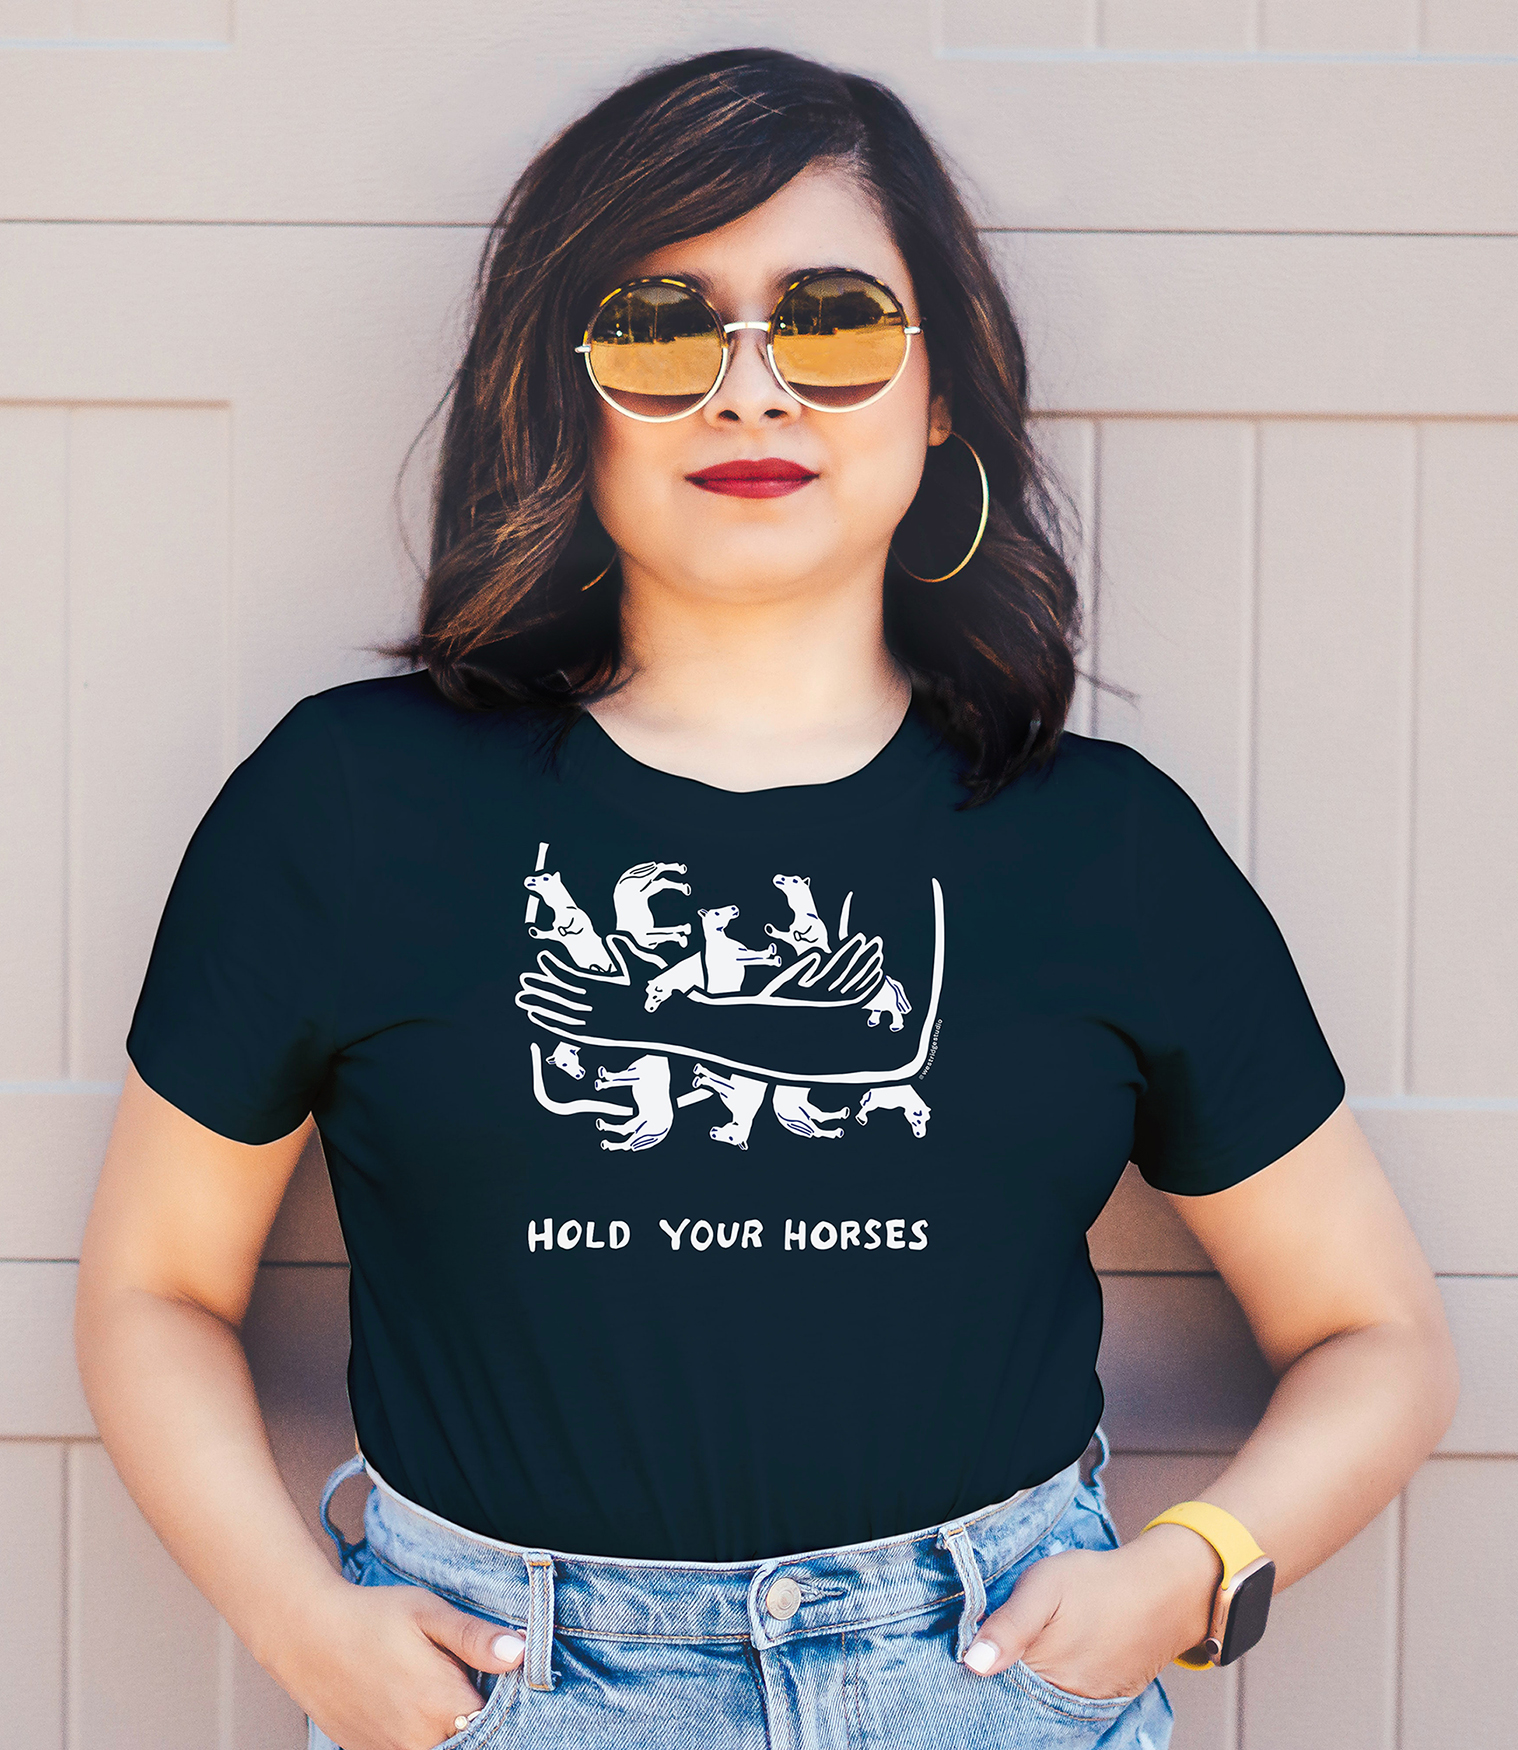 Gifts for horse lovers - women's t-shirt with Hold Your Horses graphic